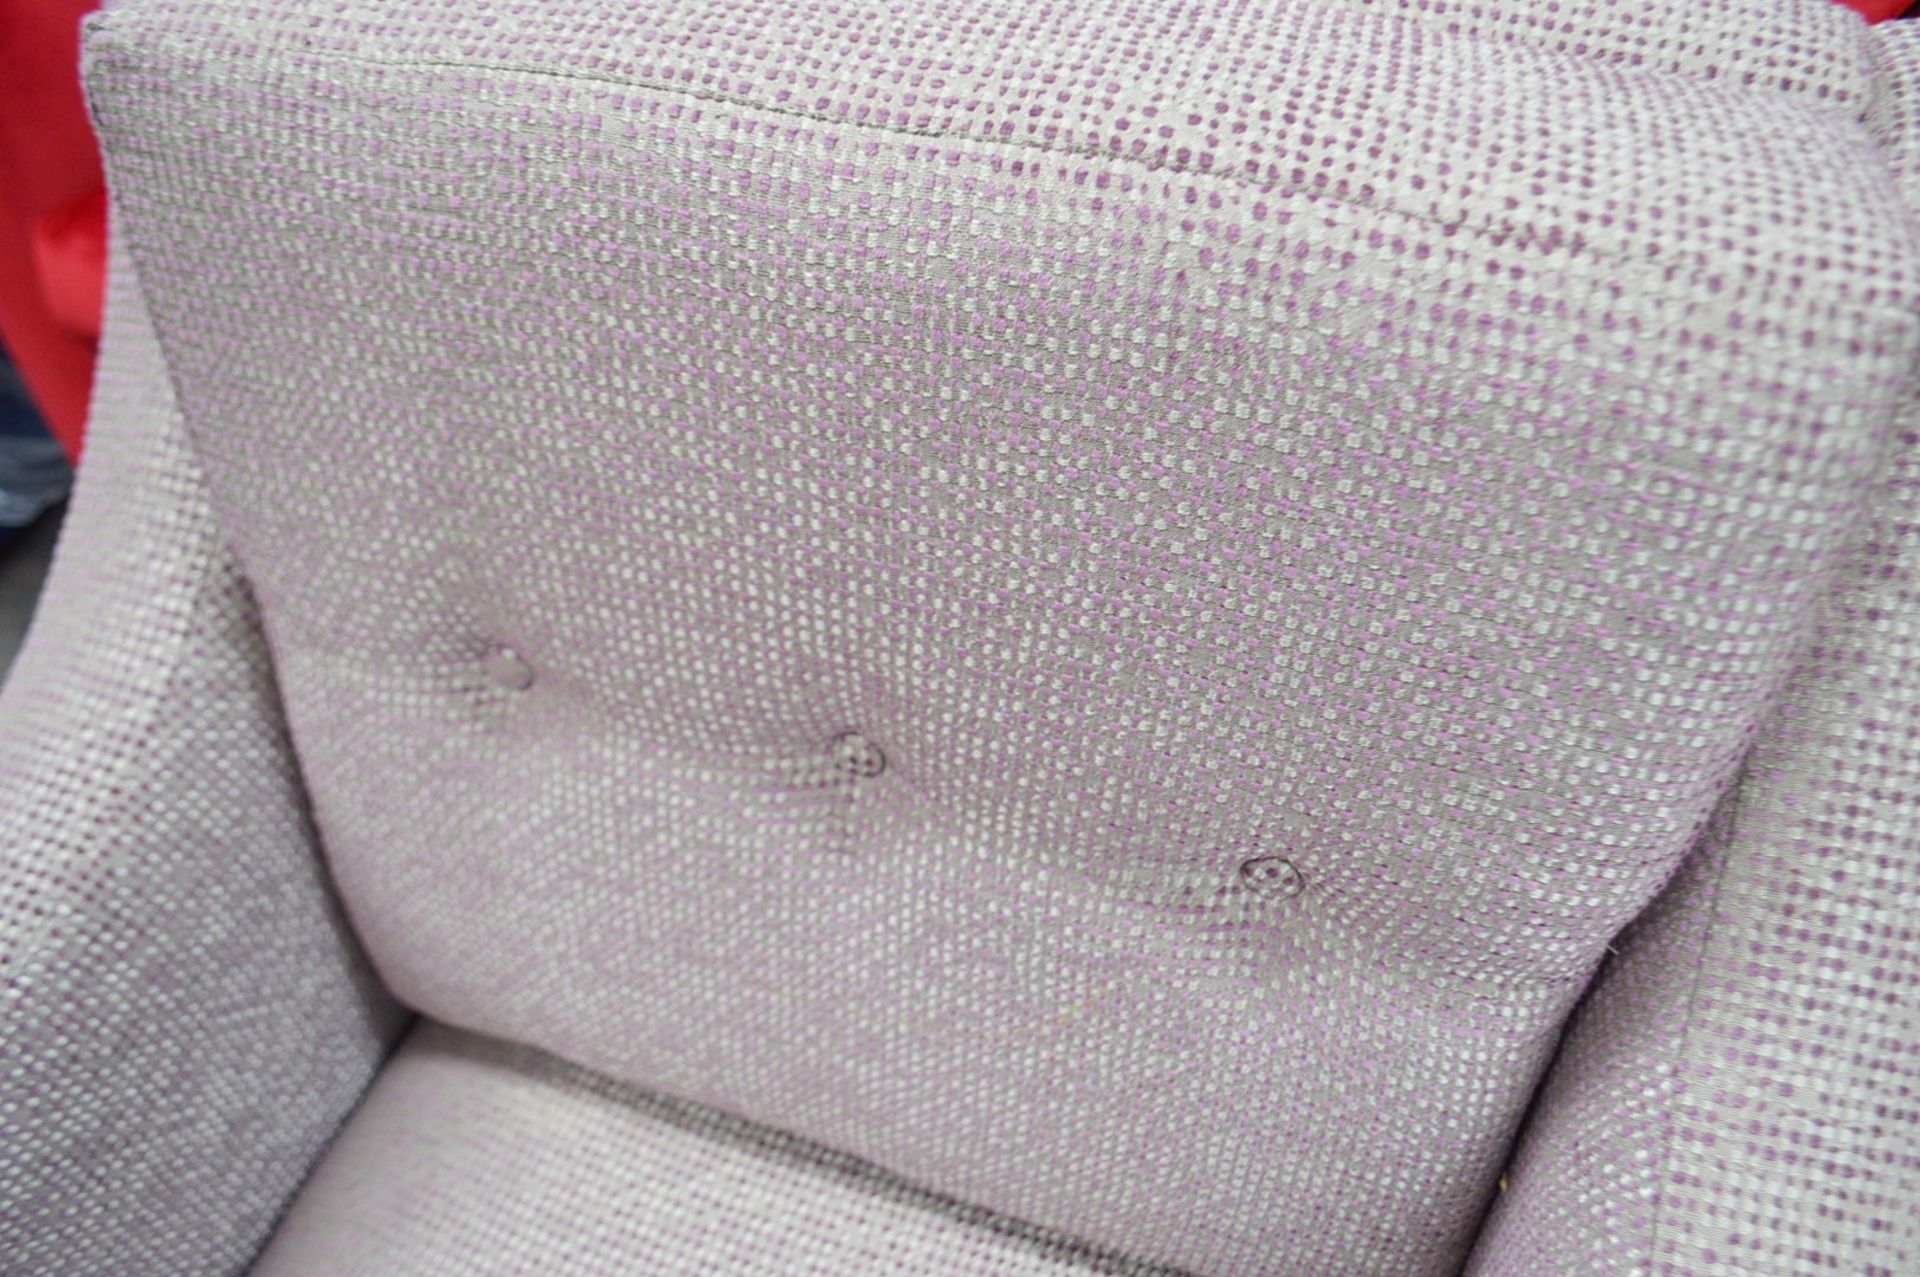 1 x Large Commercial Armchair Upholstered In A Grey & Purple Premium Fabric - Image 4 of 7